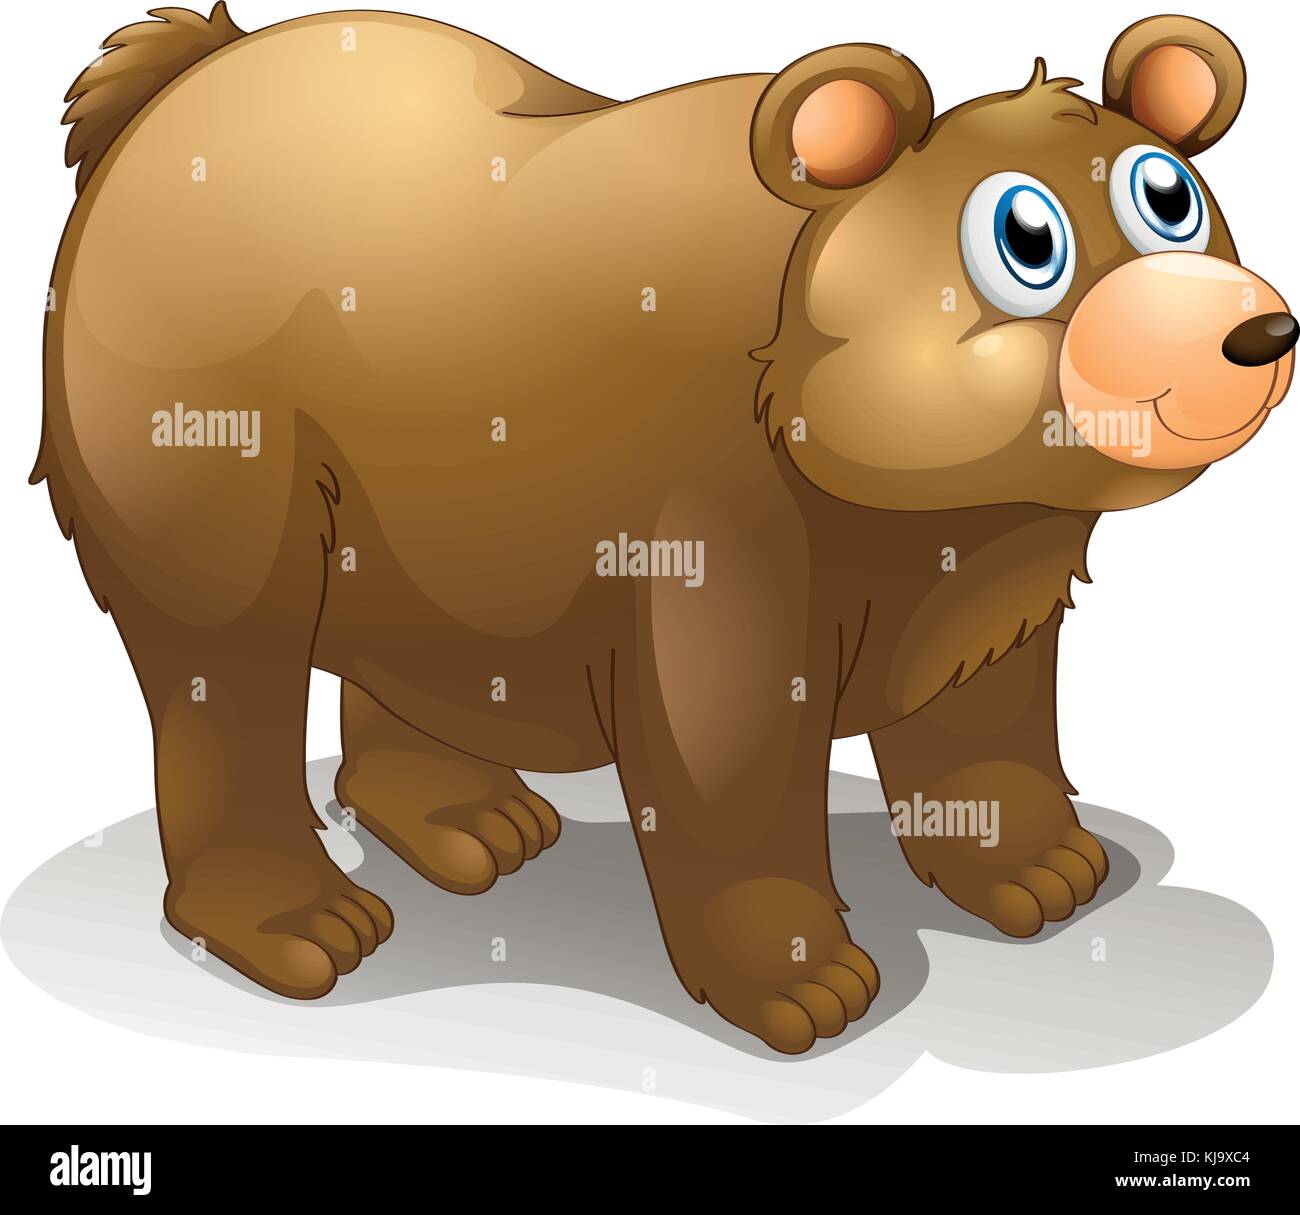 Illustration of a big brown bear on a white background Stock Vector